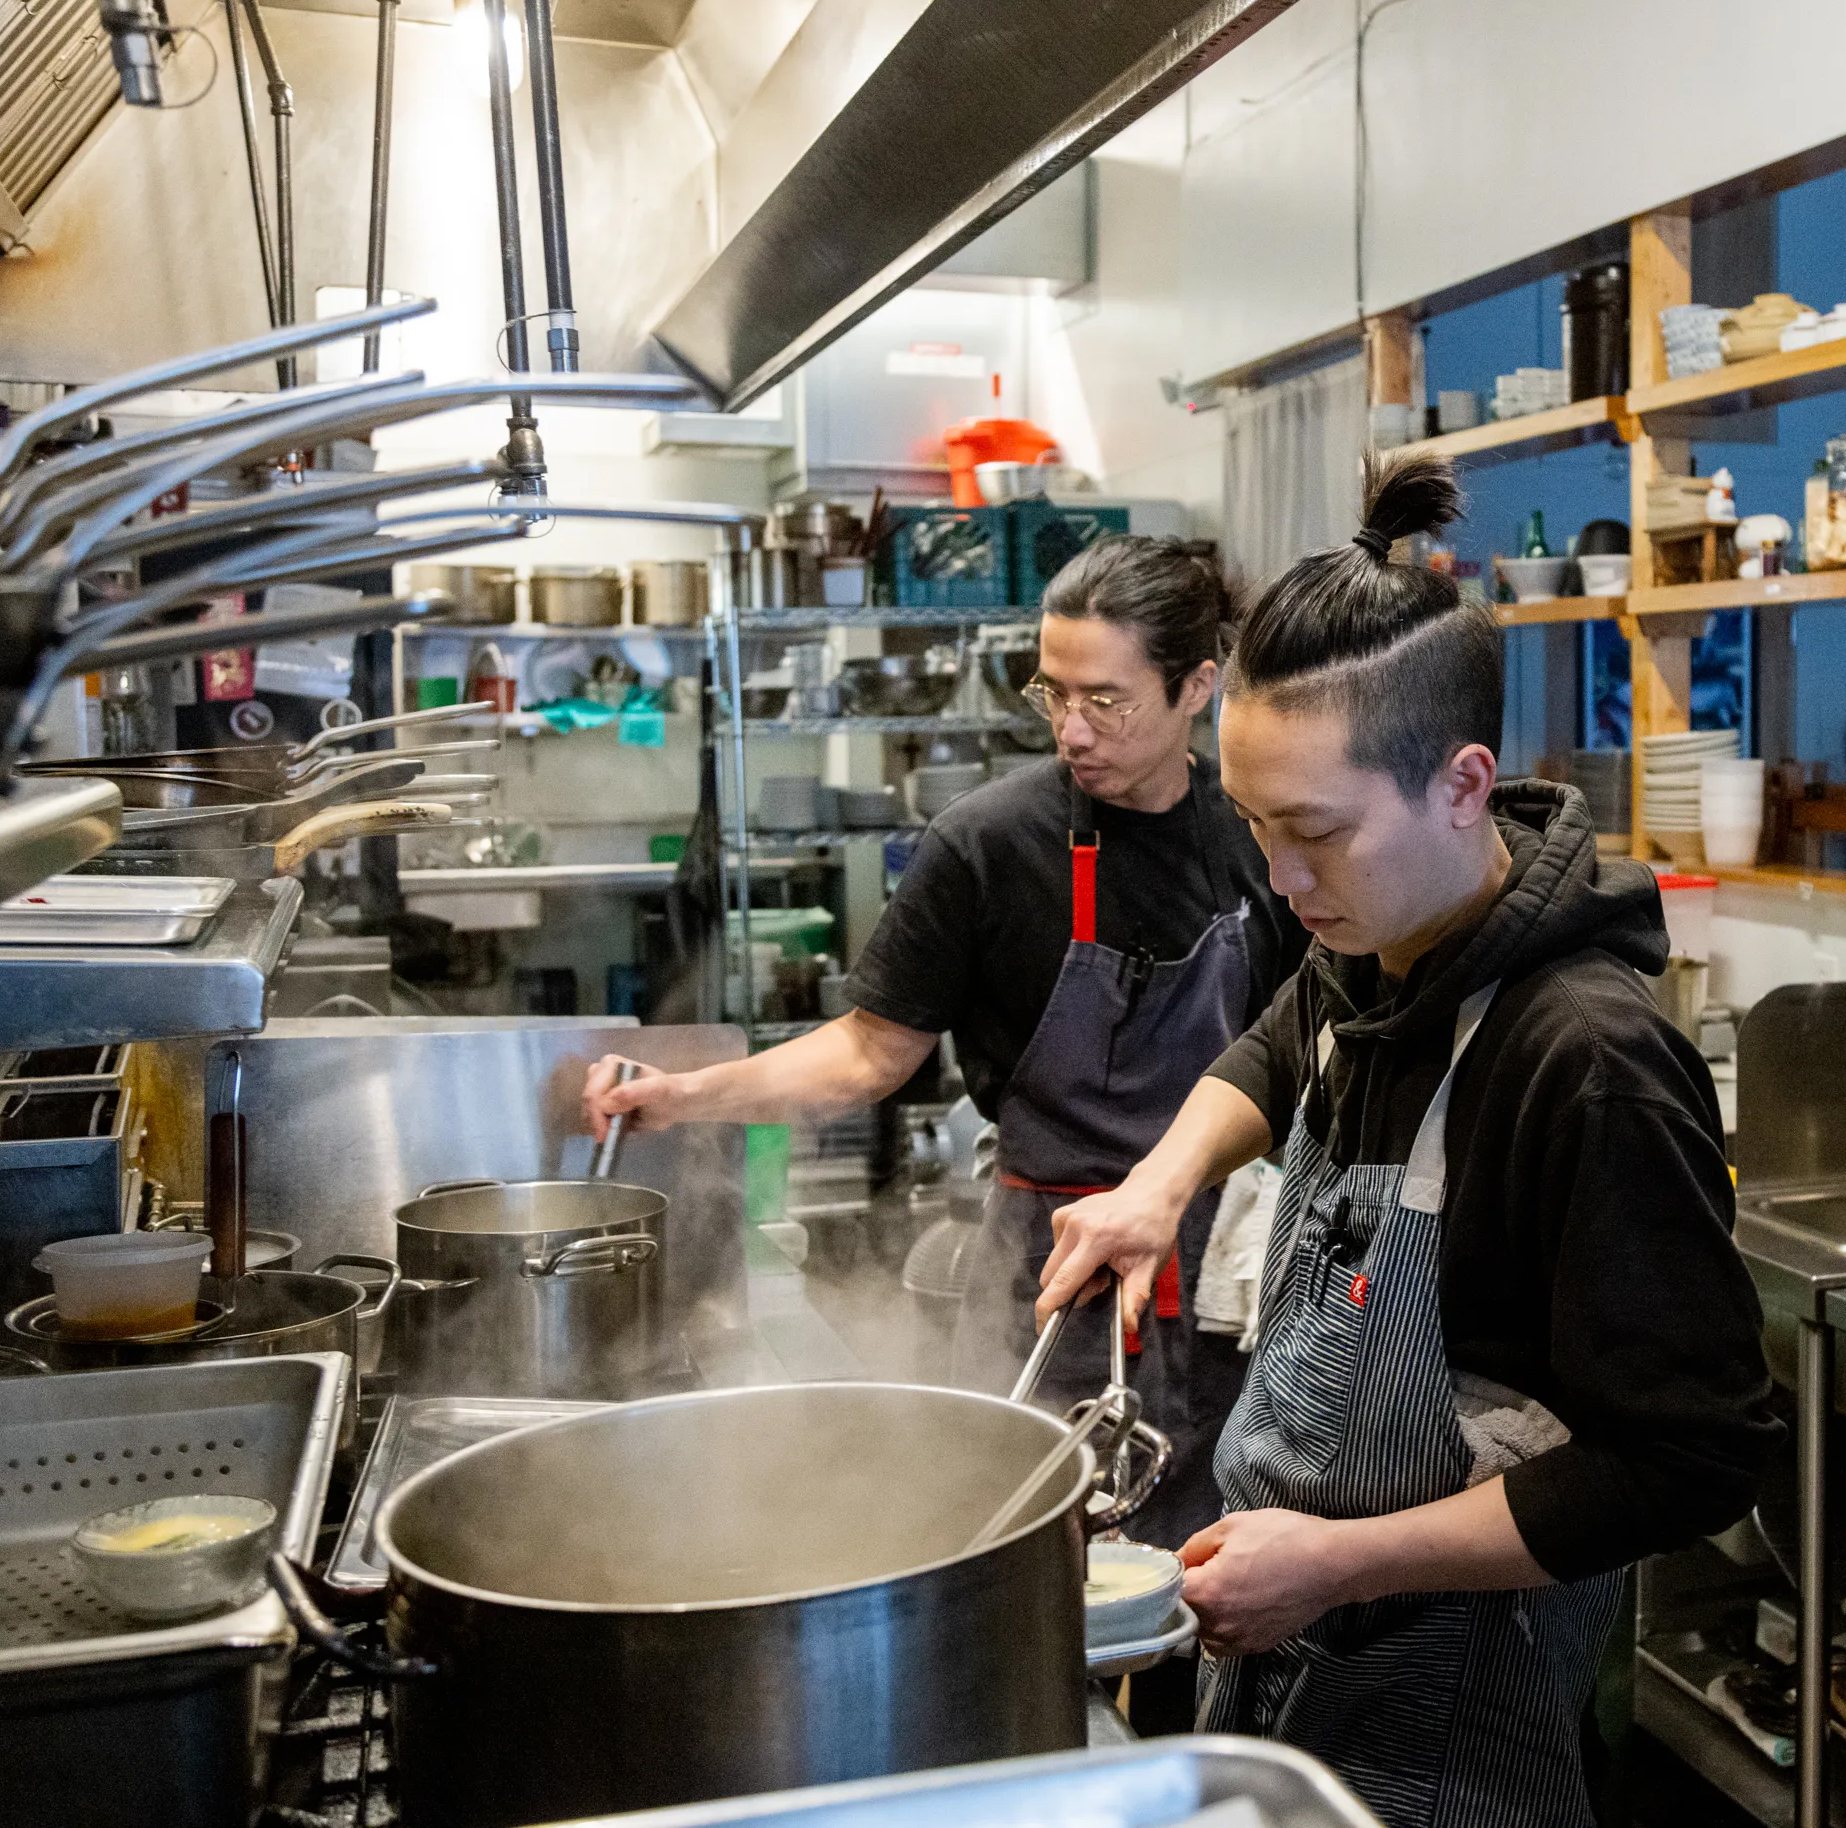 Two chefs are working in a busy commercial kitchen with pots steaming on the stove.